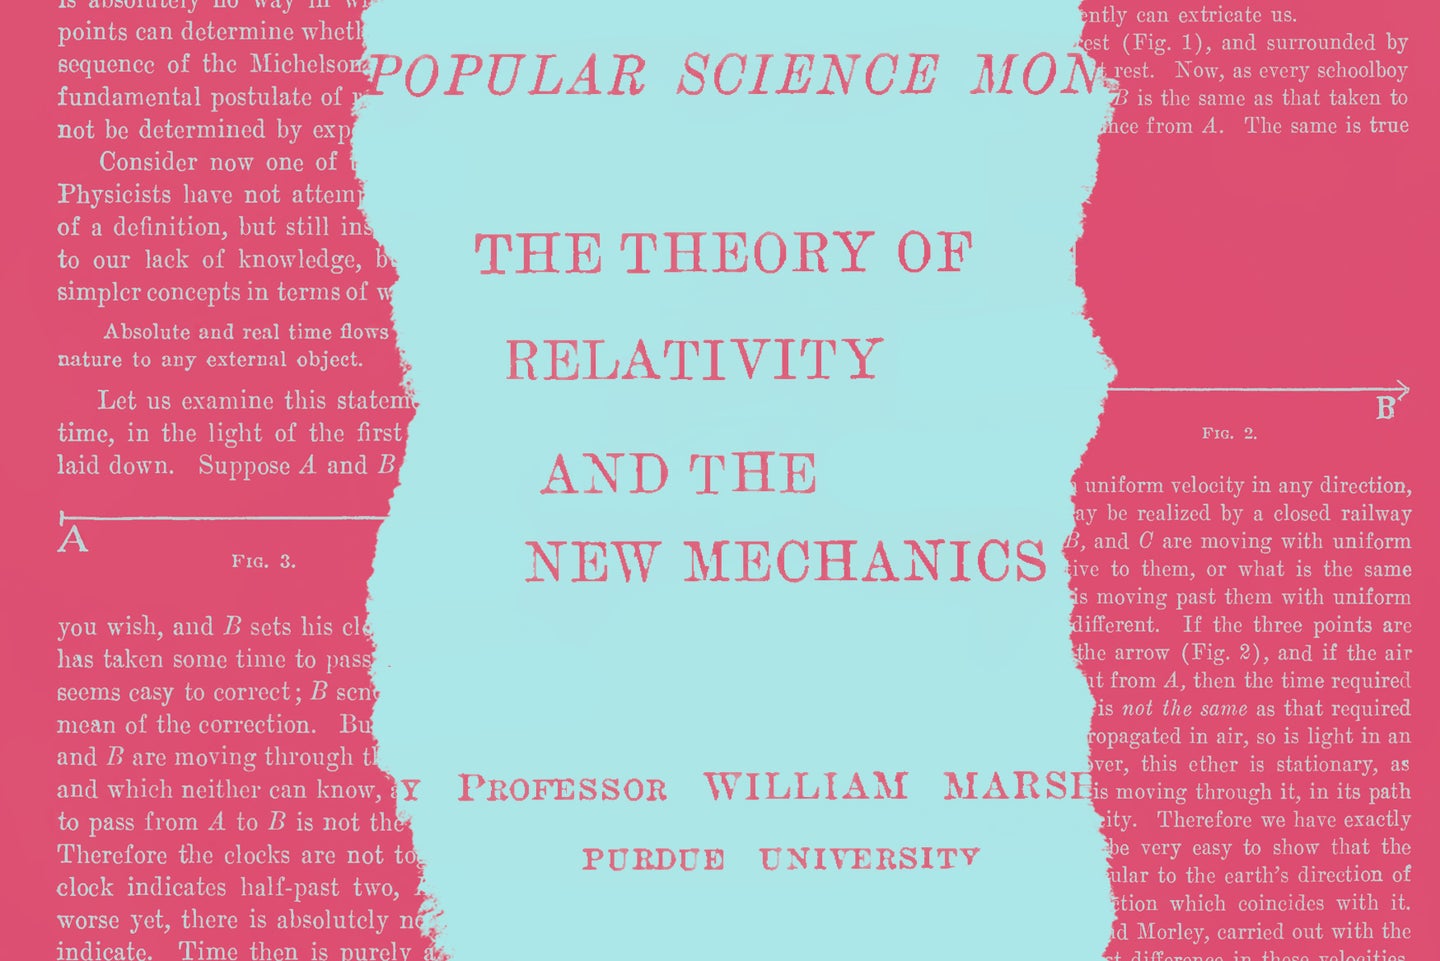 A collage of images from the Popular Science article “The theory of relativity and the new mechanics” (William Marshall, June 1914)